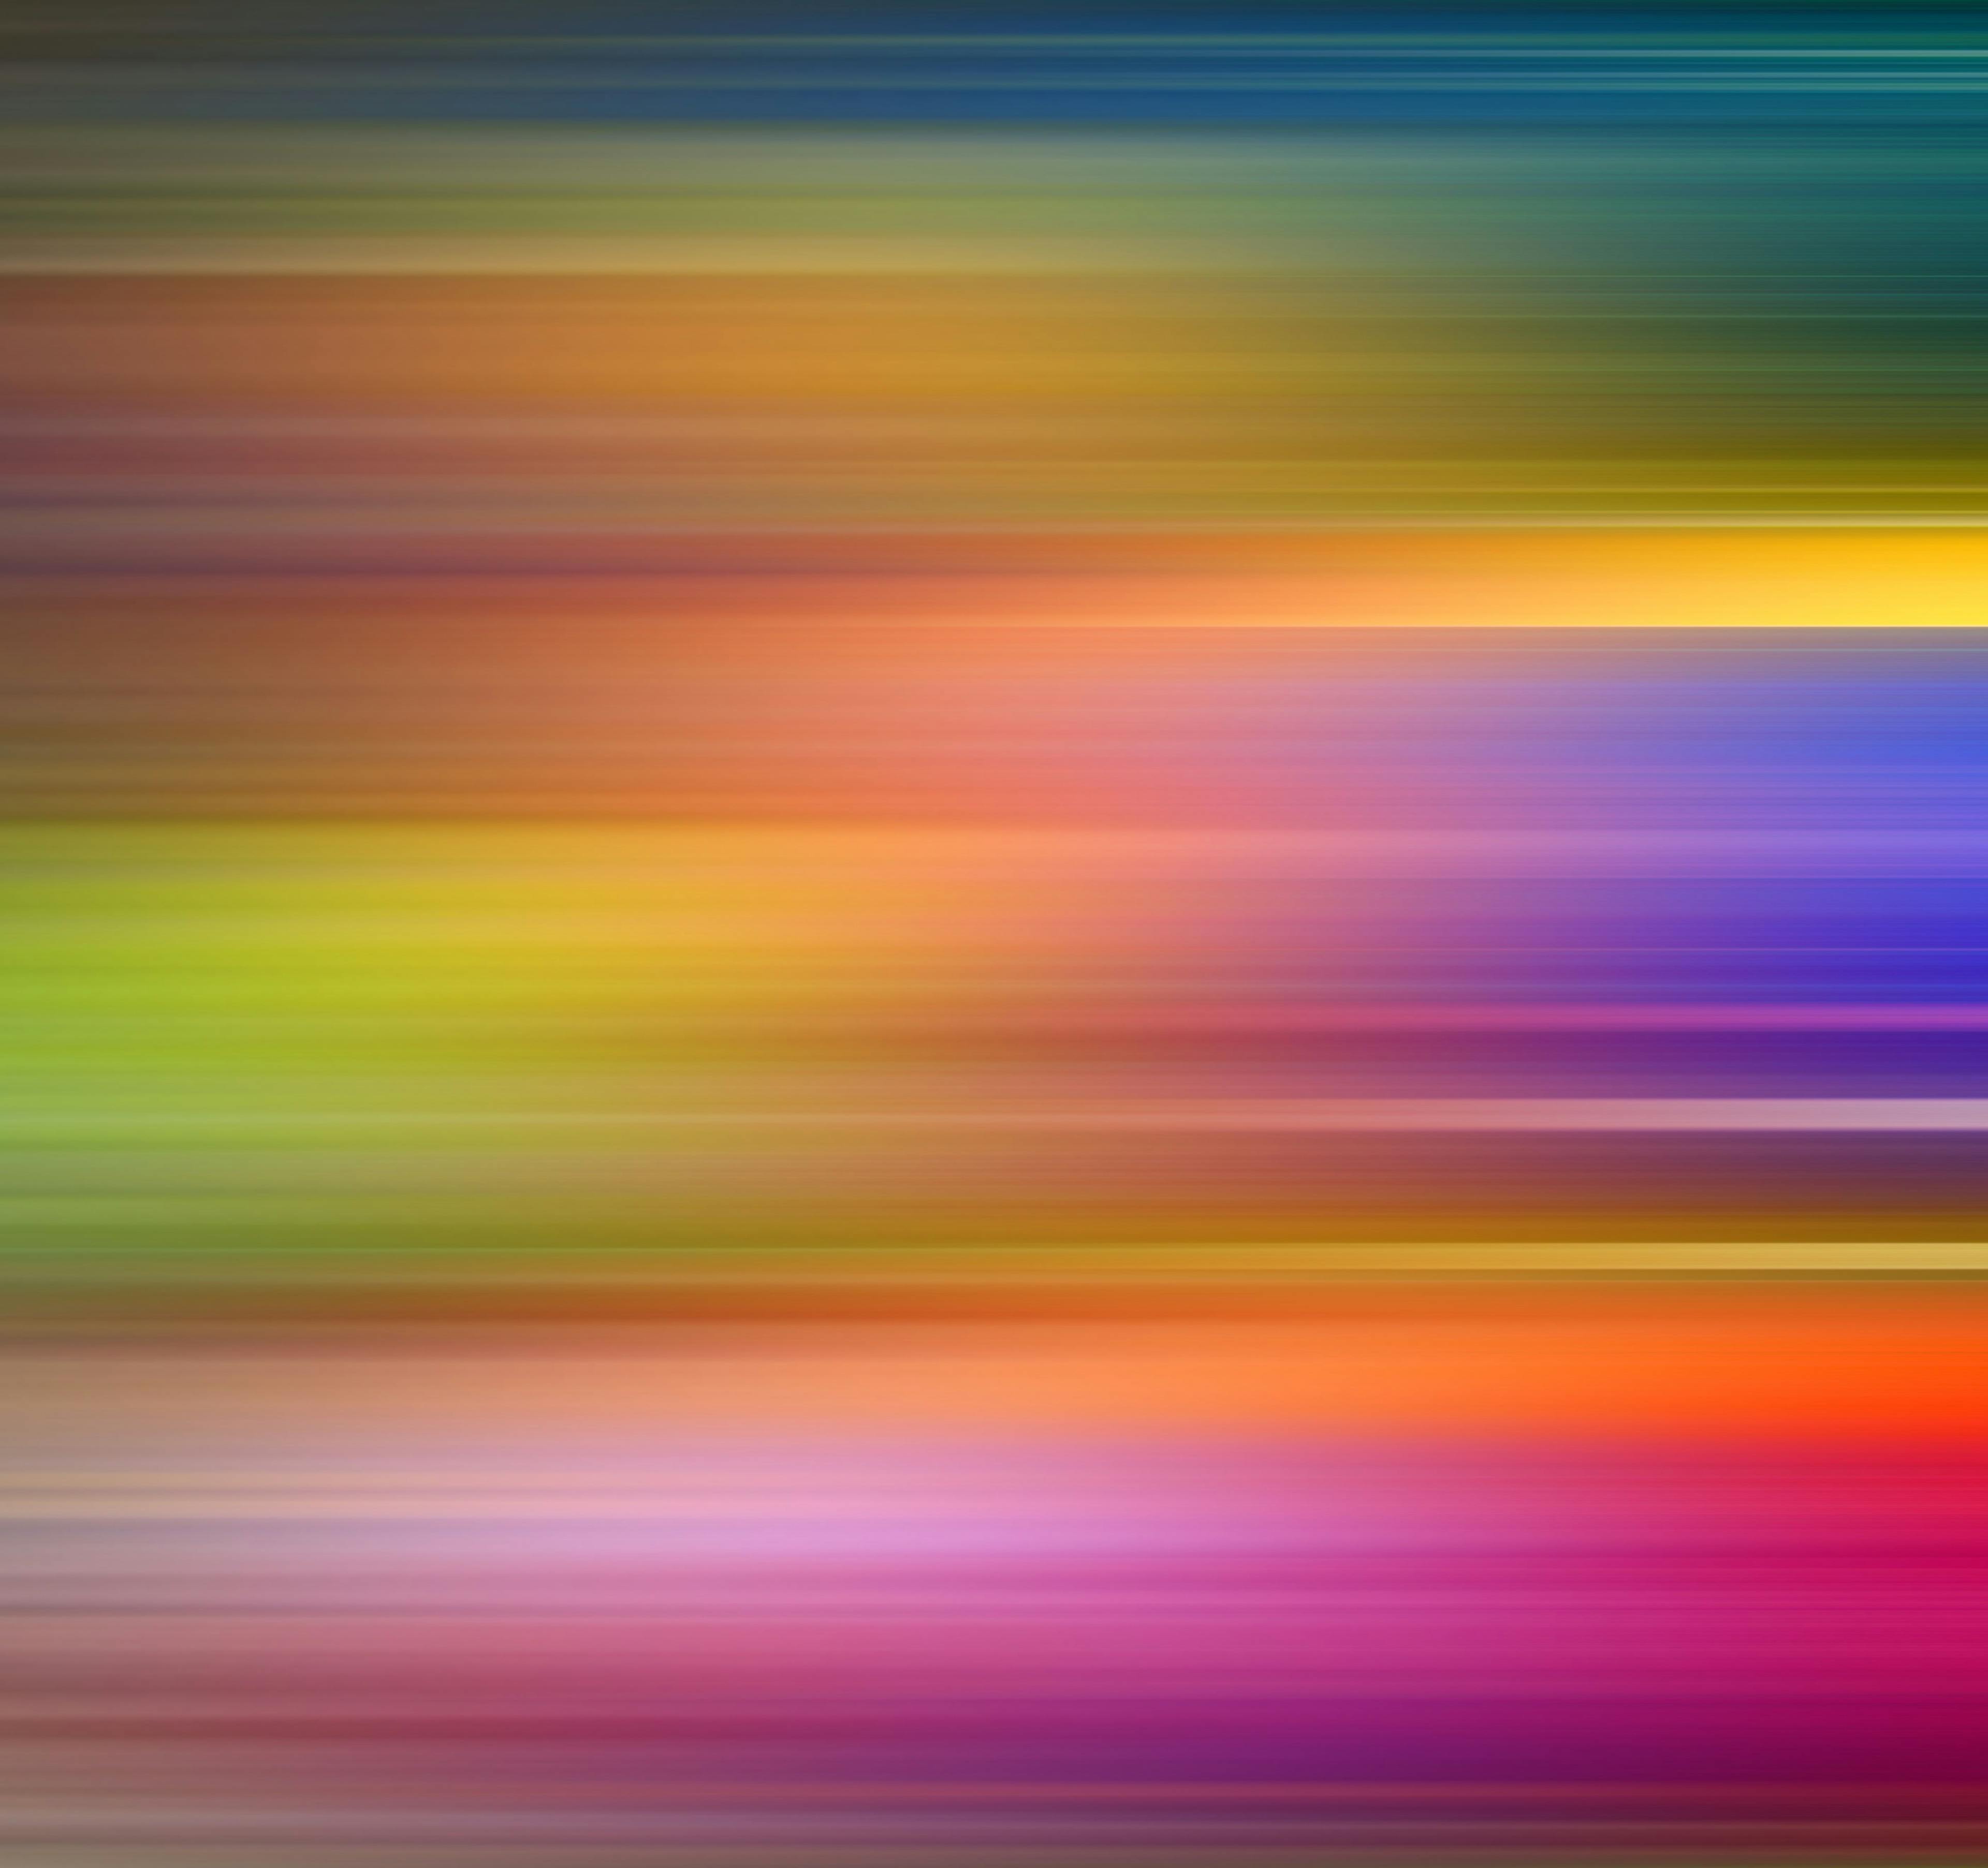 Abstract colorful background template | Image Credit: © malija - stock.adobe.com